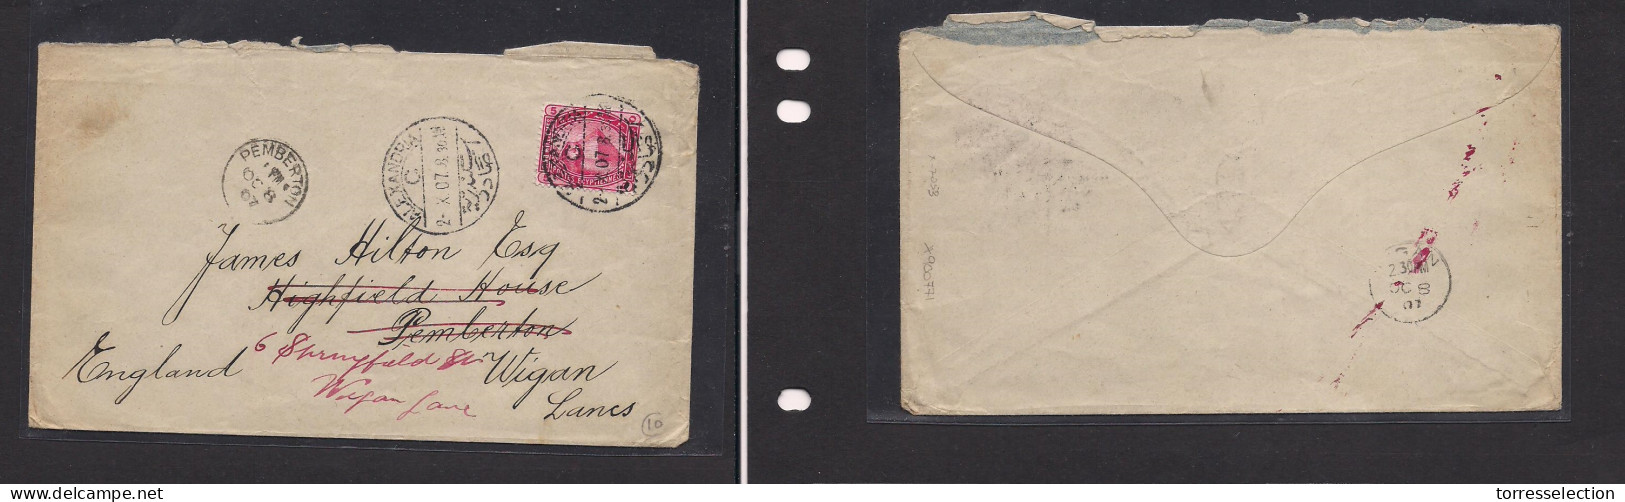 EGYPT. Egypt - Cover - 1907 Alexandria To Wigan, Lancs, UK Single Pyramid 5mred Stamp Fkd Env, Fwded, Nice. Easy Deal. X - Autres & Non Classés